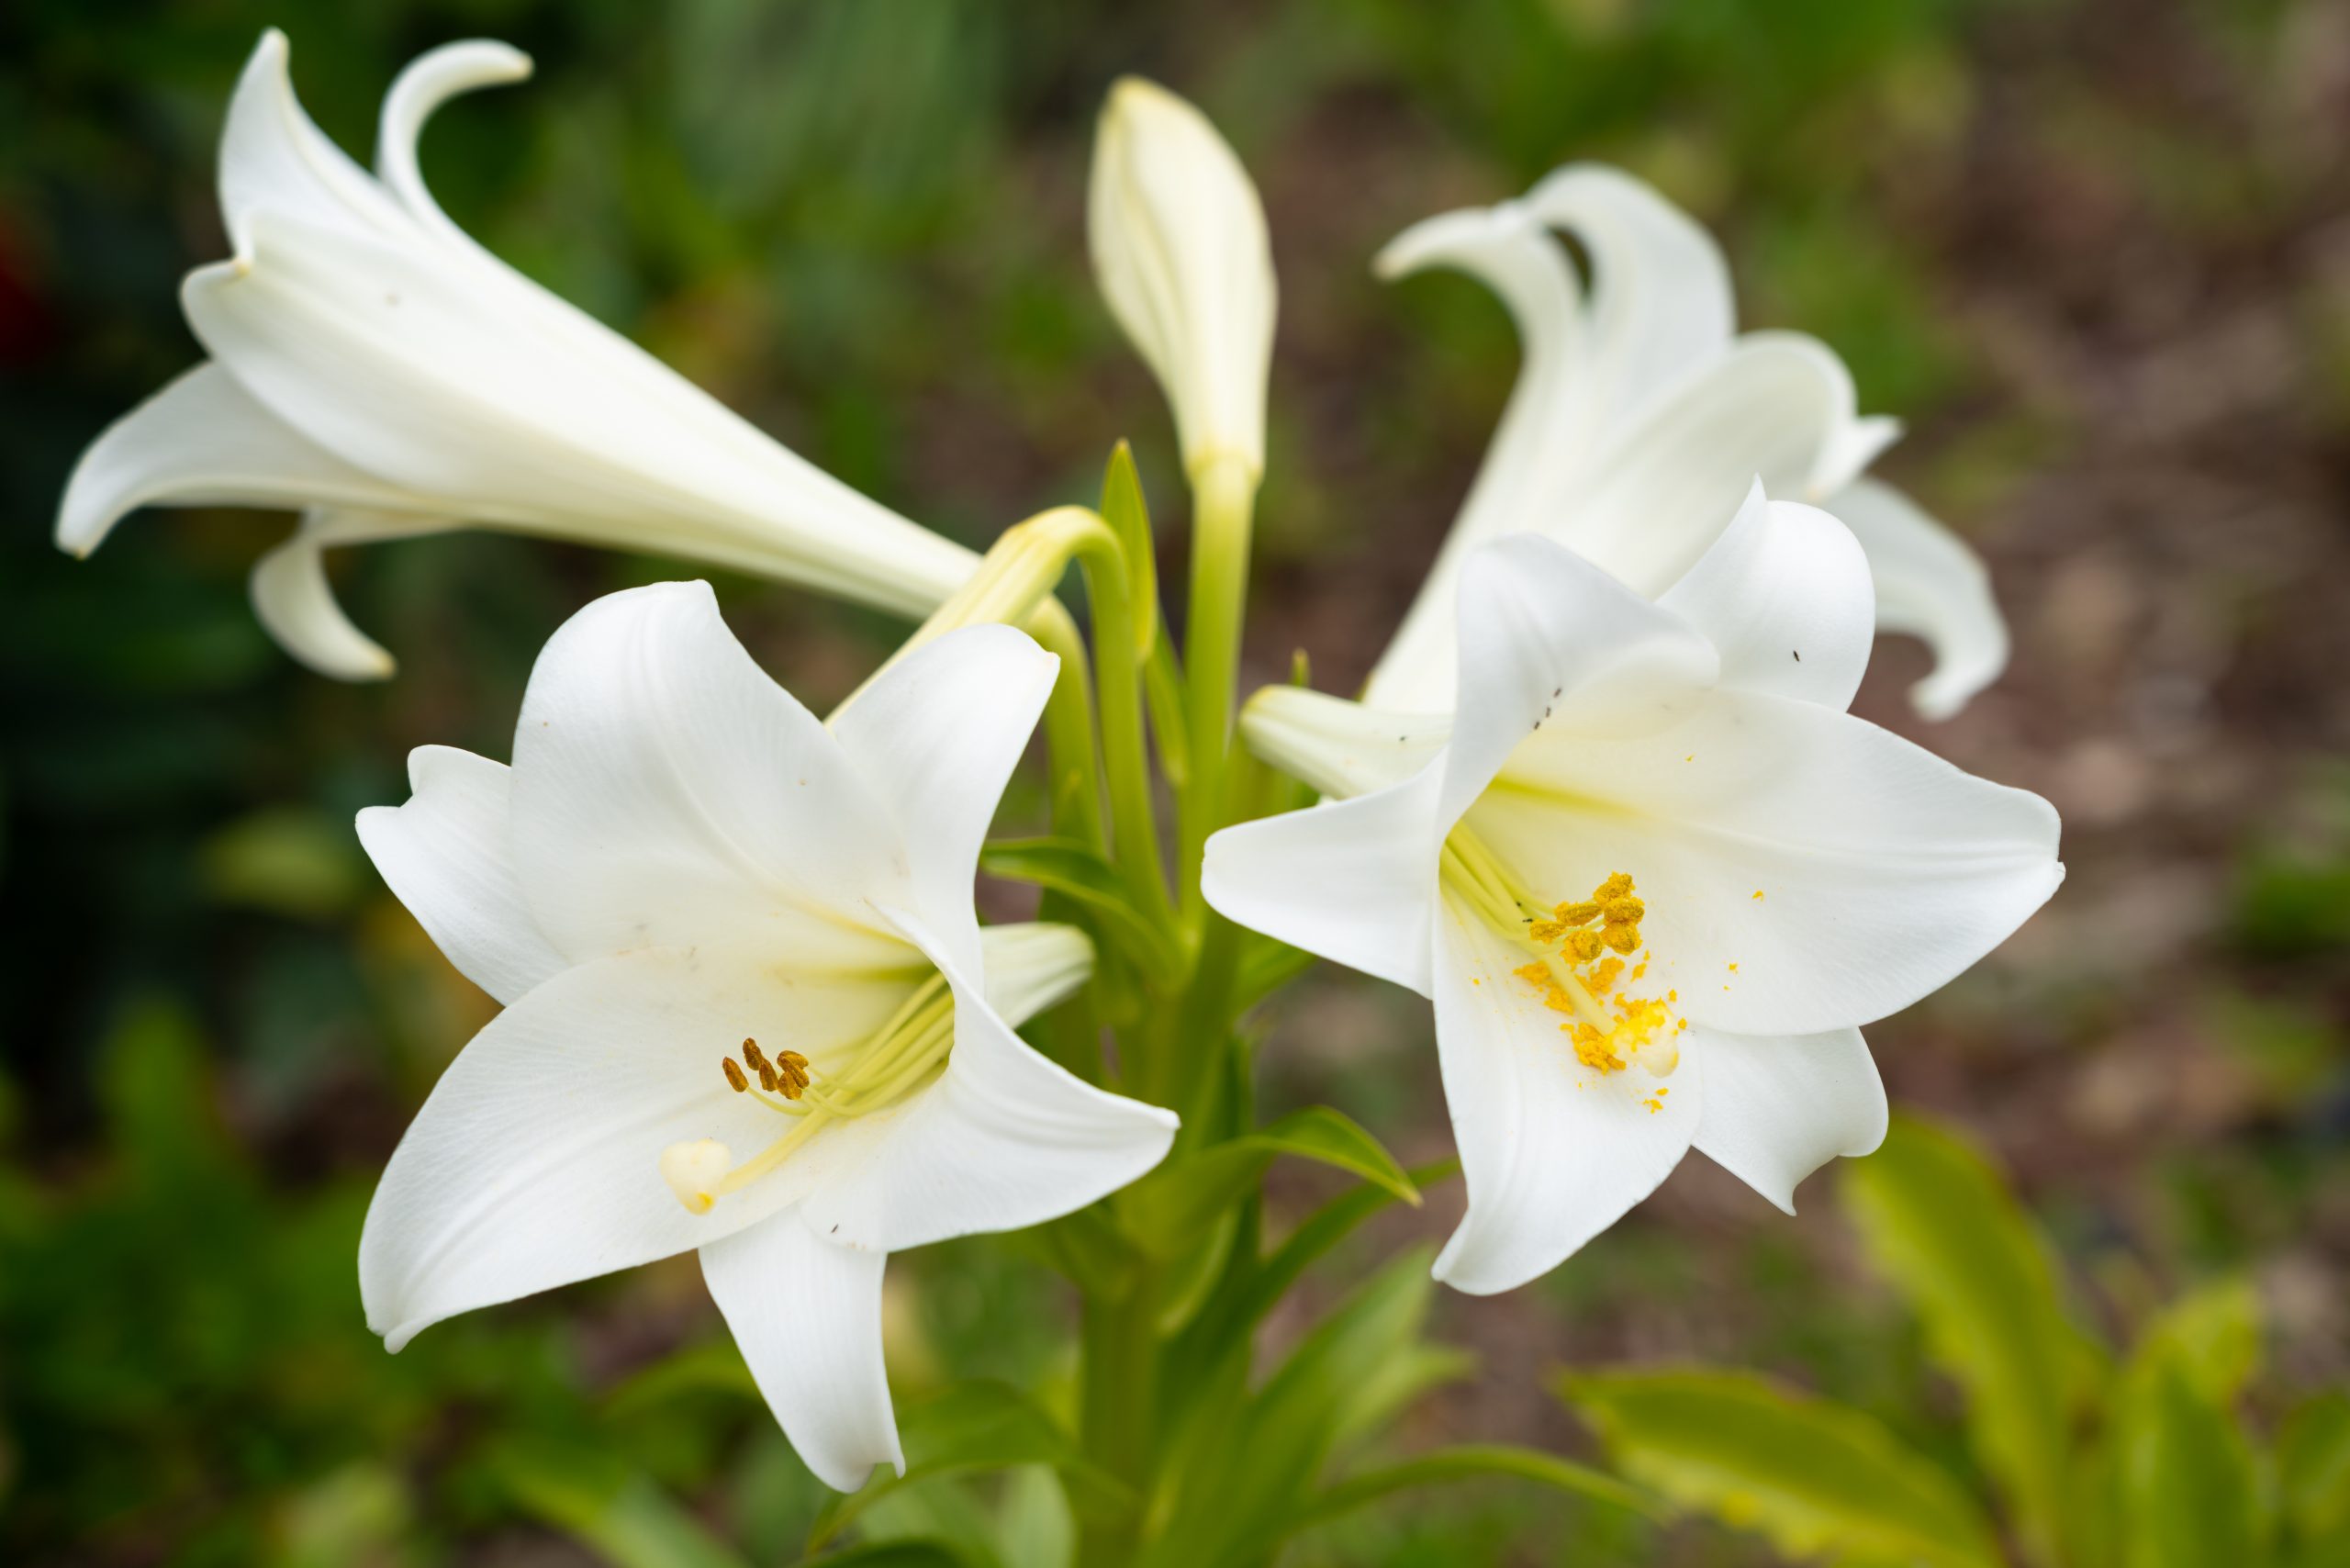 Types Of White Lilies Shop Factory, Save 53% | jlcatj.gob.mx